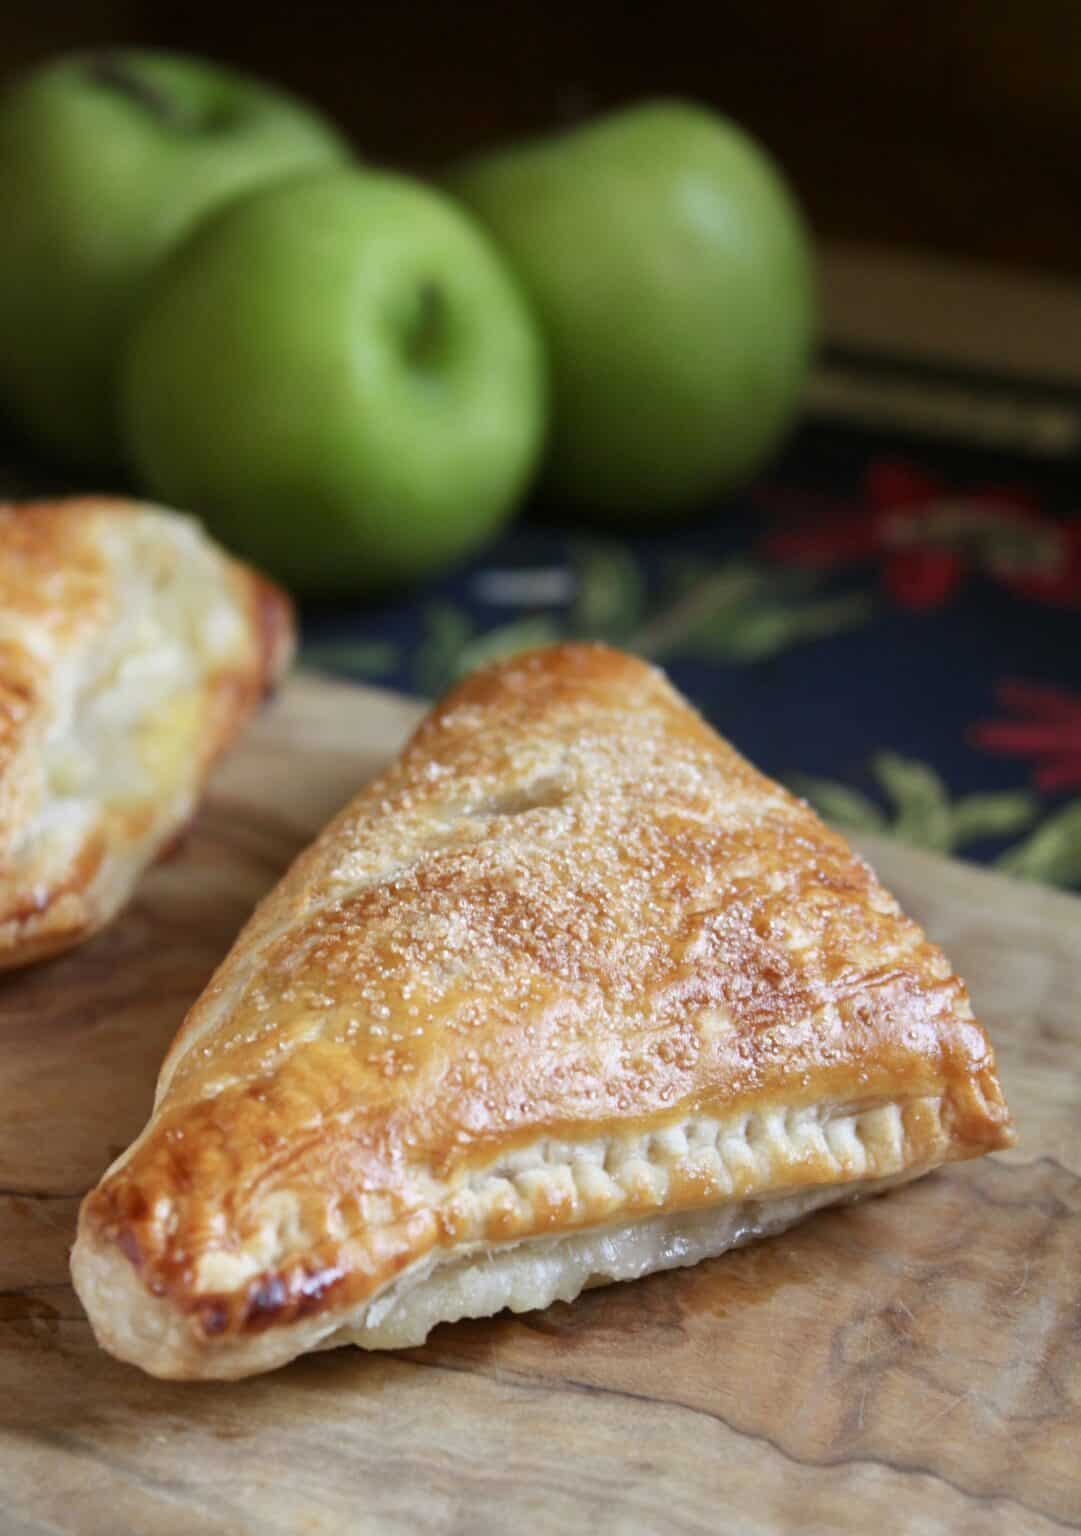 Apple Turnover Recipe (with Puff Pastry) - Christina's Cucina